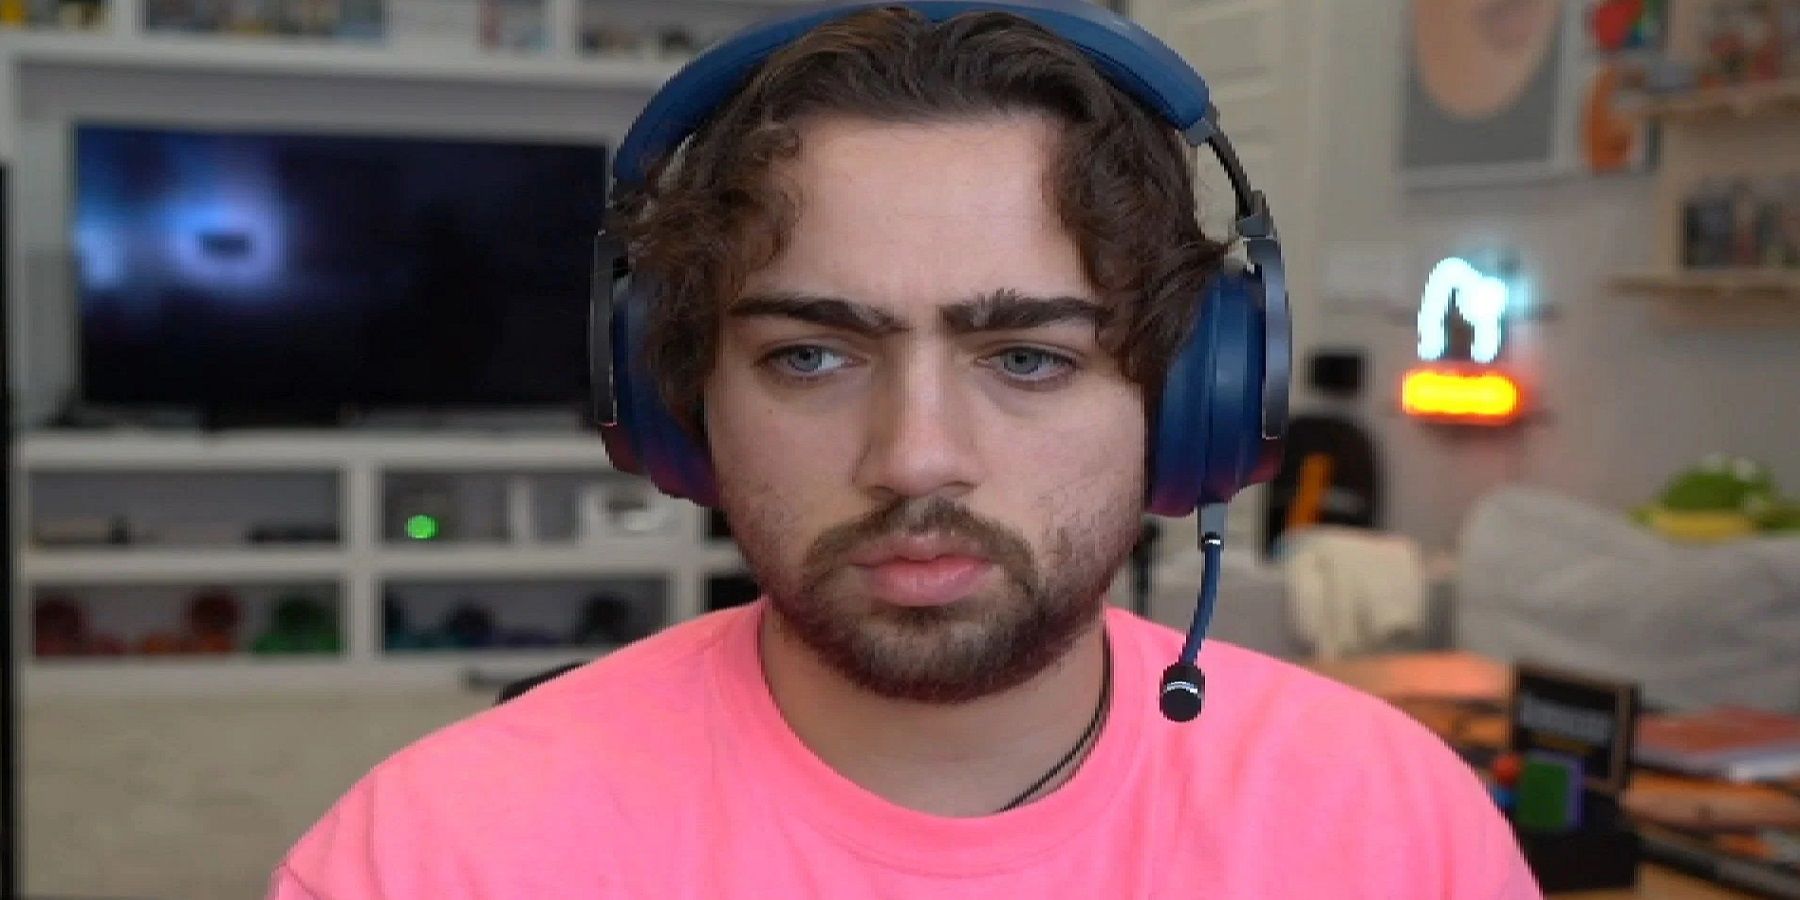 After educating himself, Mizkif is not going to a lucrative Fortnite event in Saudi Arabia.